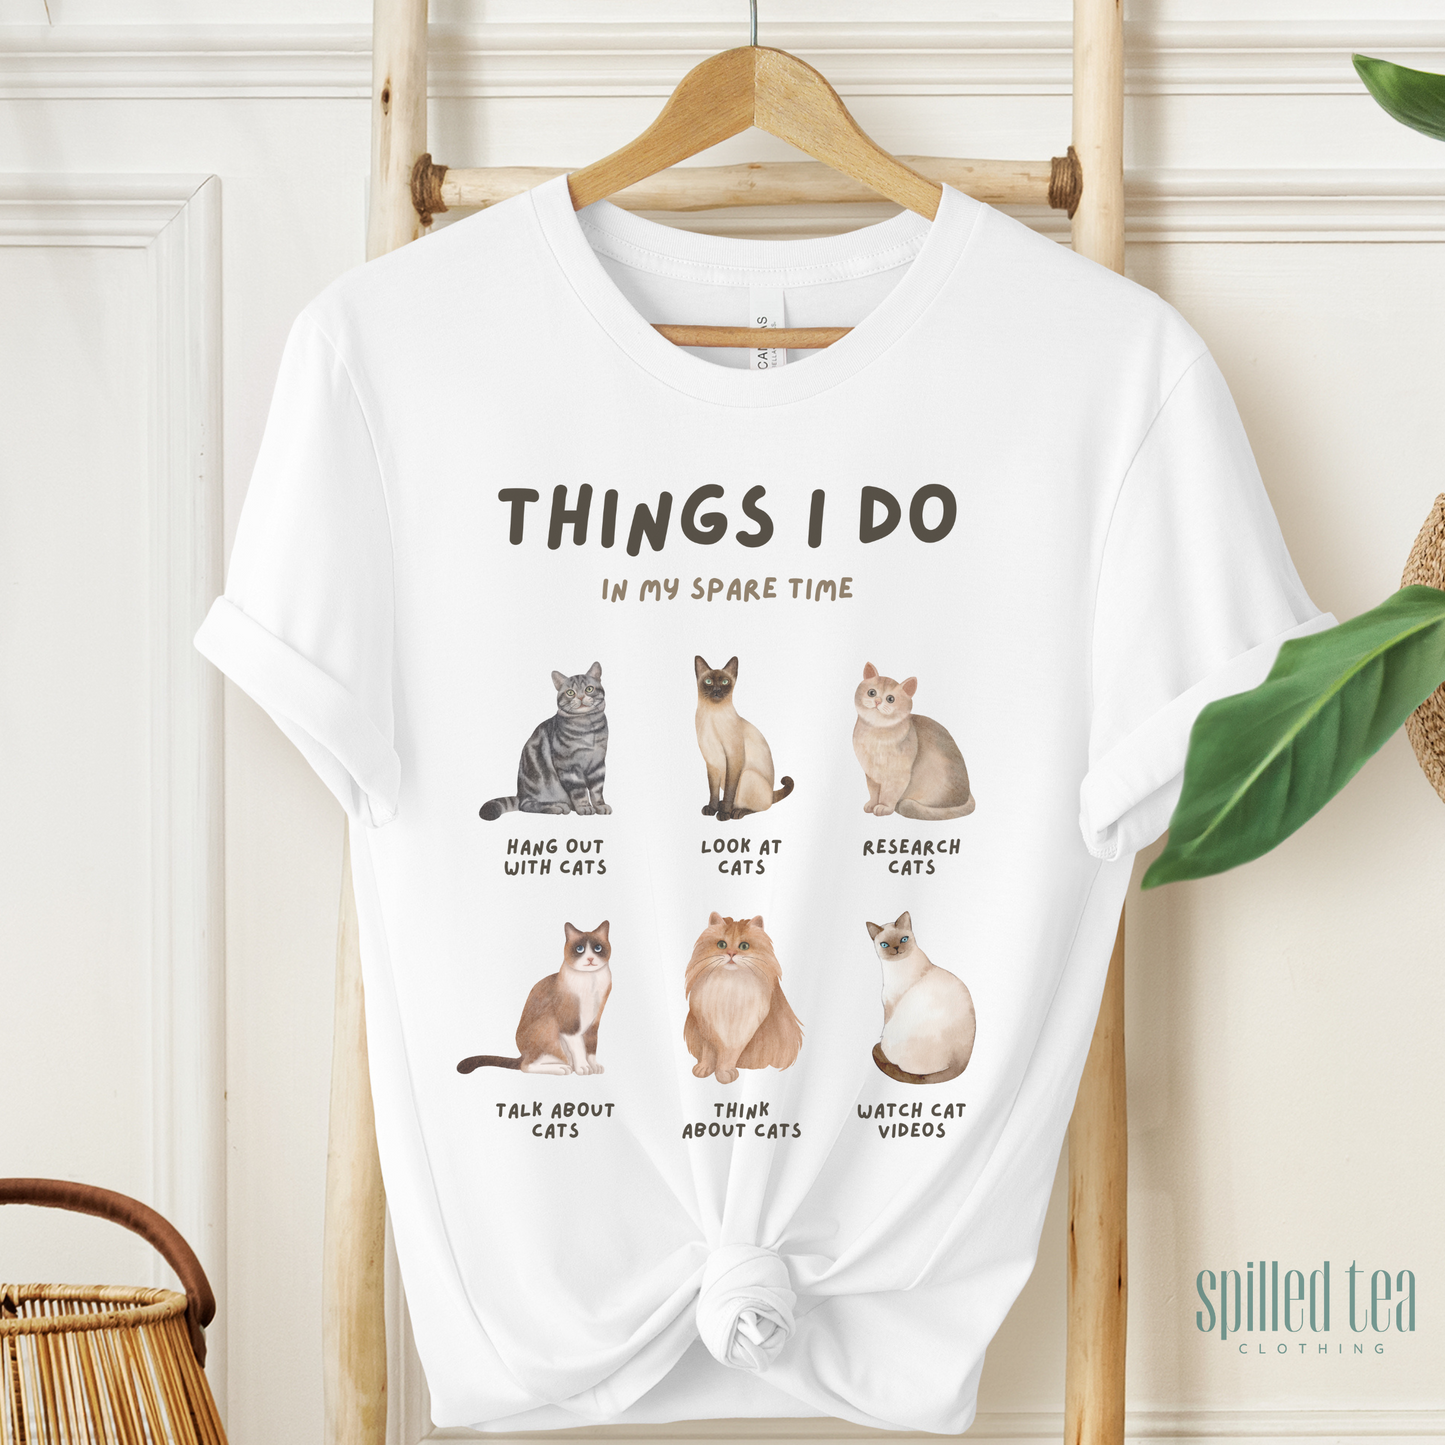 Things I Do In My Spare Time (Cats) T-Shirt